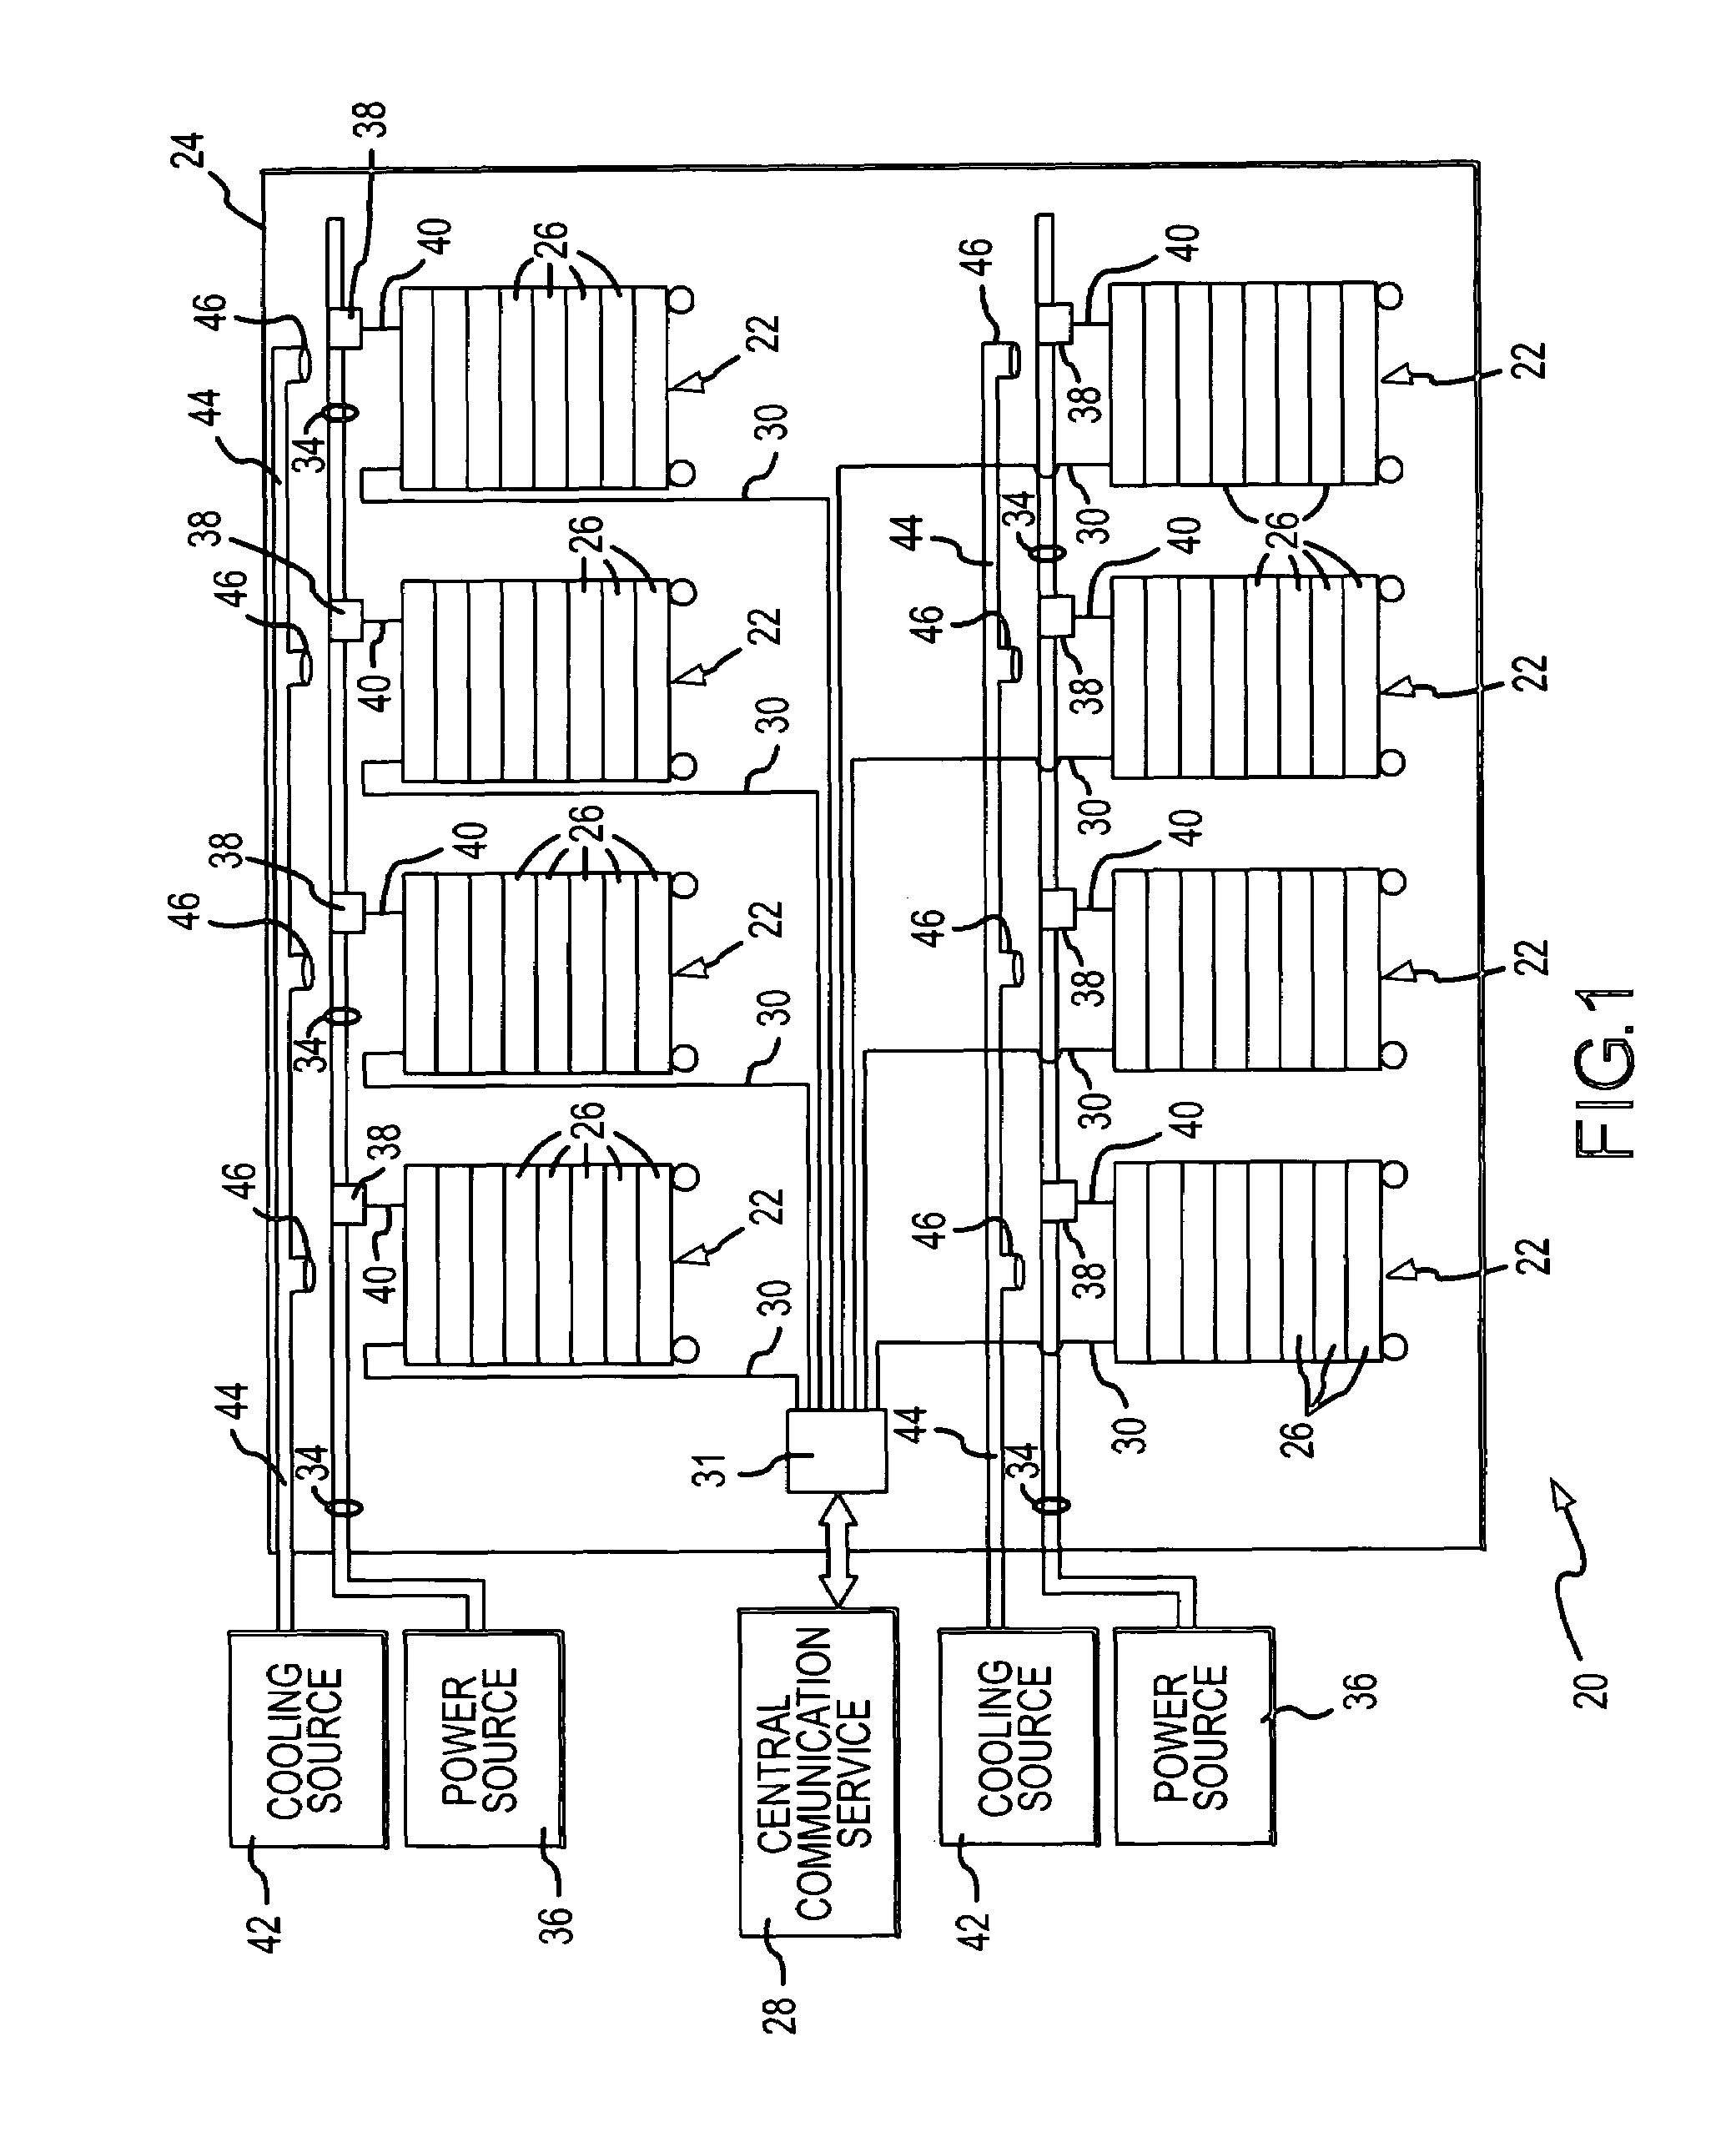 Data center with mobile data cabinets and method of mobilizing and connecting data processing devices in a data center using consolidated data communications and power connections